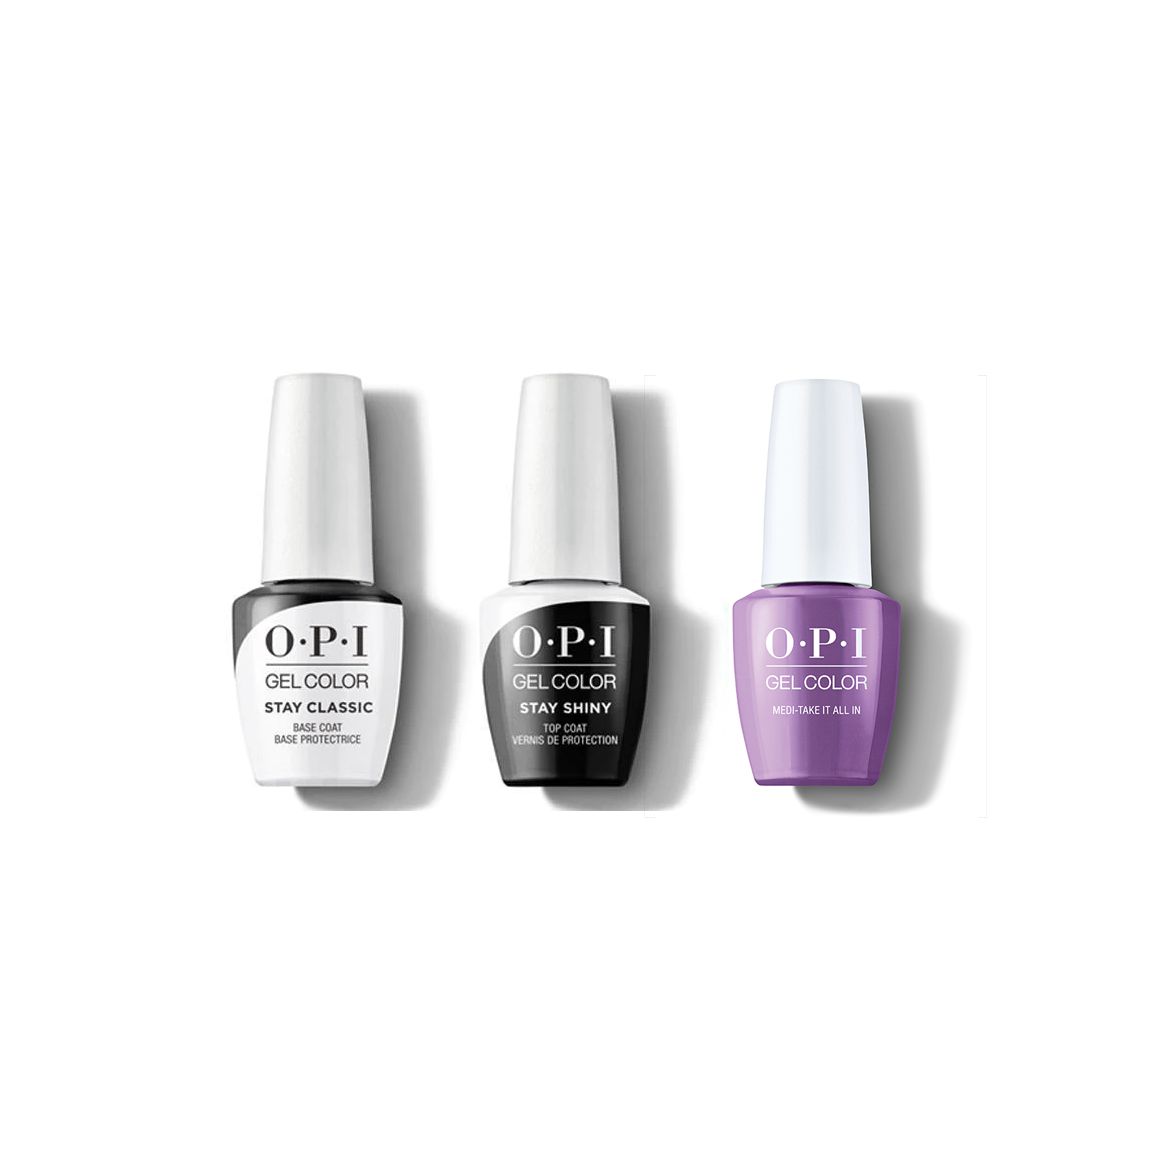 OPI - Gel Color Combo - Stay Classic Base, Shiny Top & Medi-take It All In